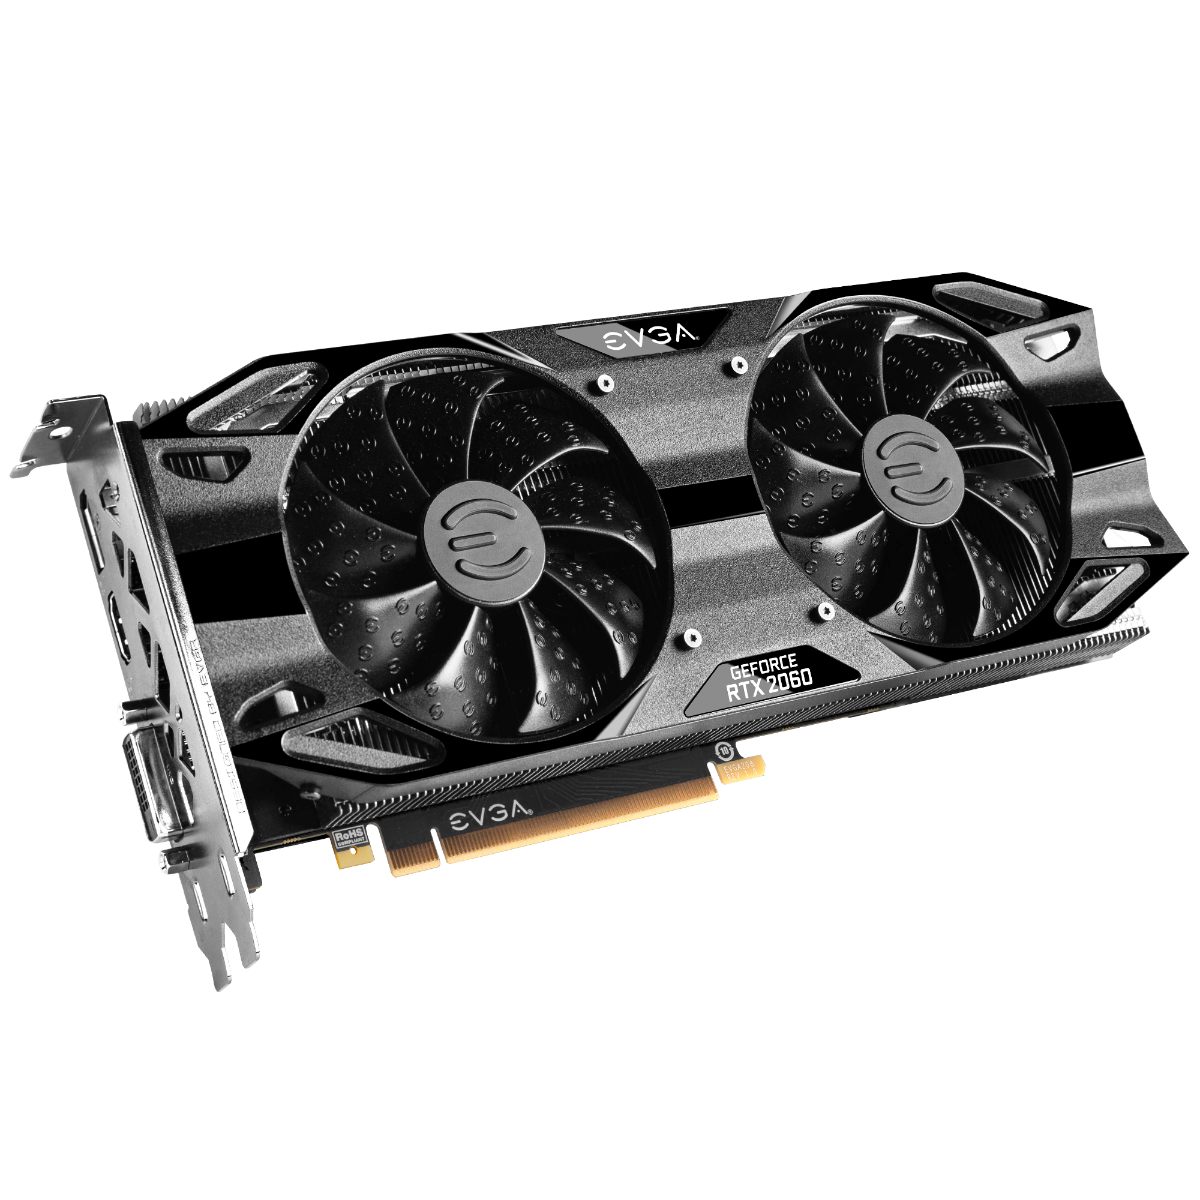 **Requires 600W Power Supply** NVIDIA RTX 2060 12GB GDDR6